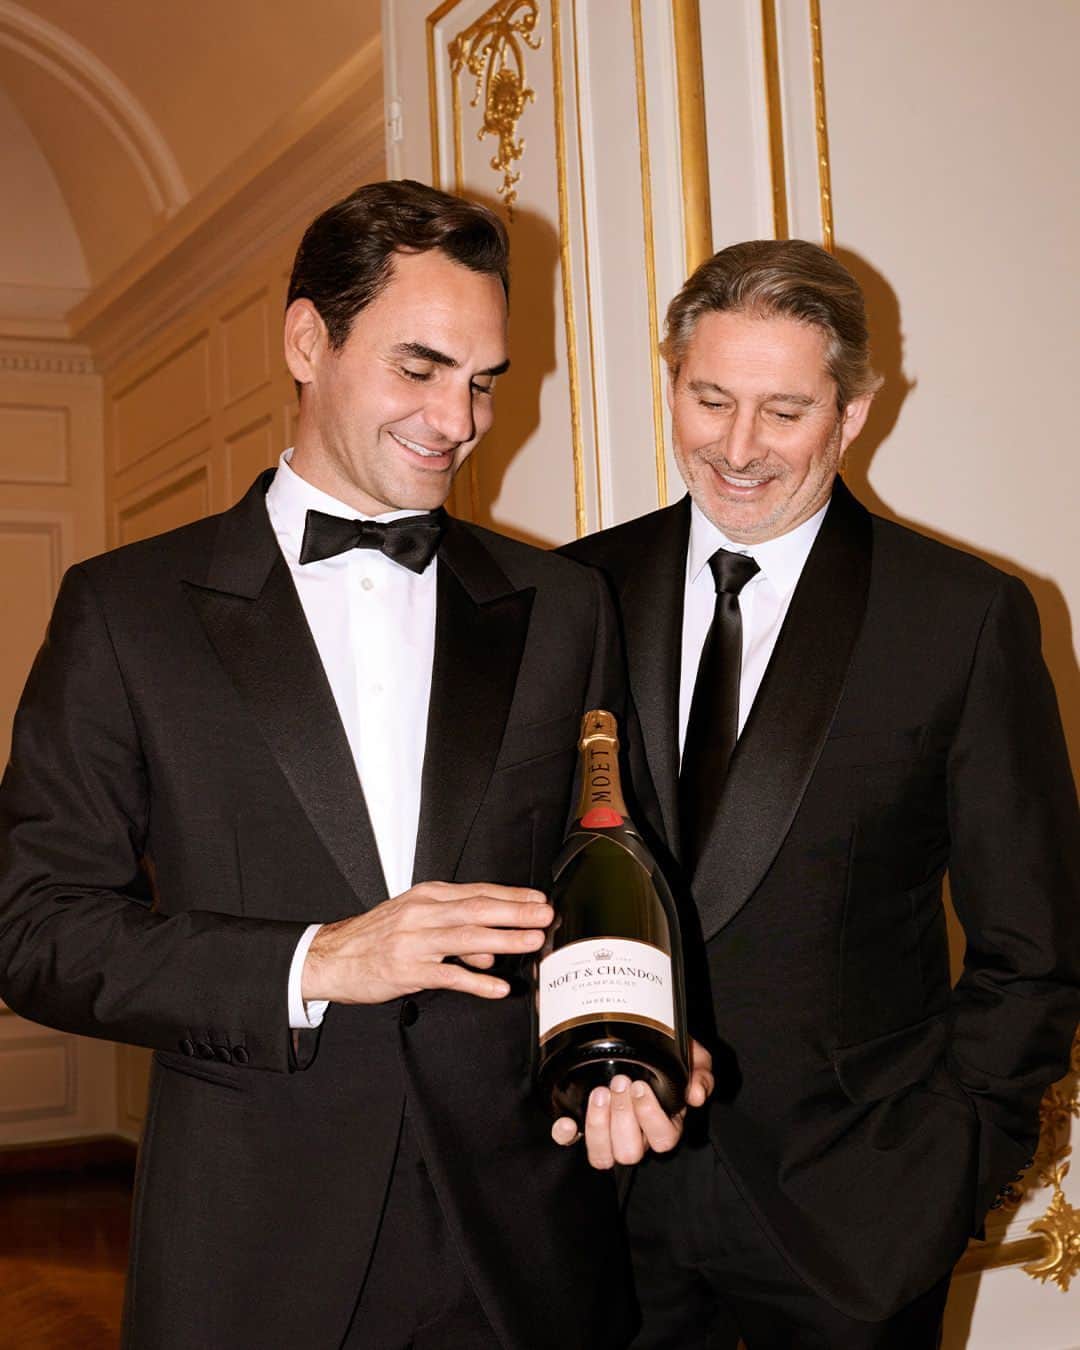 Moët & Chandon Officialのインスタグラム：「Ever wonder which champagne would pair amazingly with a radiant dinner “à la française”? Well, Roger Federer and Moët & Chandon Cellar Master Benoît Gouez might have an idea. ⁣ ⁣ @rogerfederer⁣ #ToastWithMoet #MoetImperial #MoetChandon⁣ ⁣ This material is not intended to be viewed by persons under the legal alcohol drinking age or in countries with restrictions on advertising on alcoholic beverages. ENJOY MOËT RESPONSIBLY.」